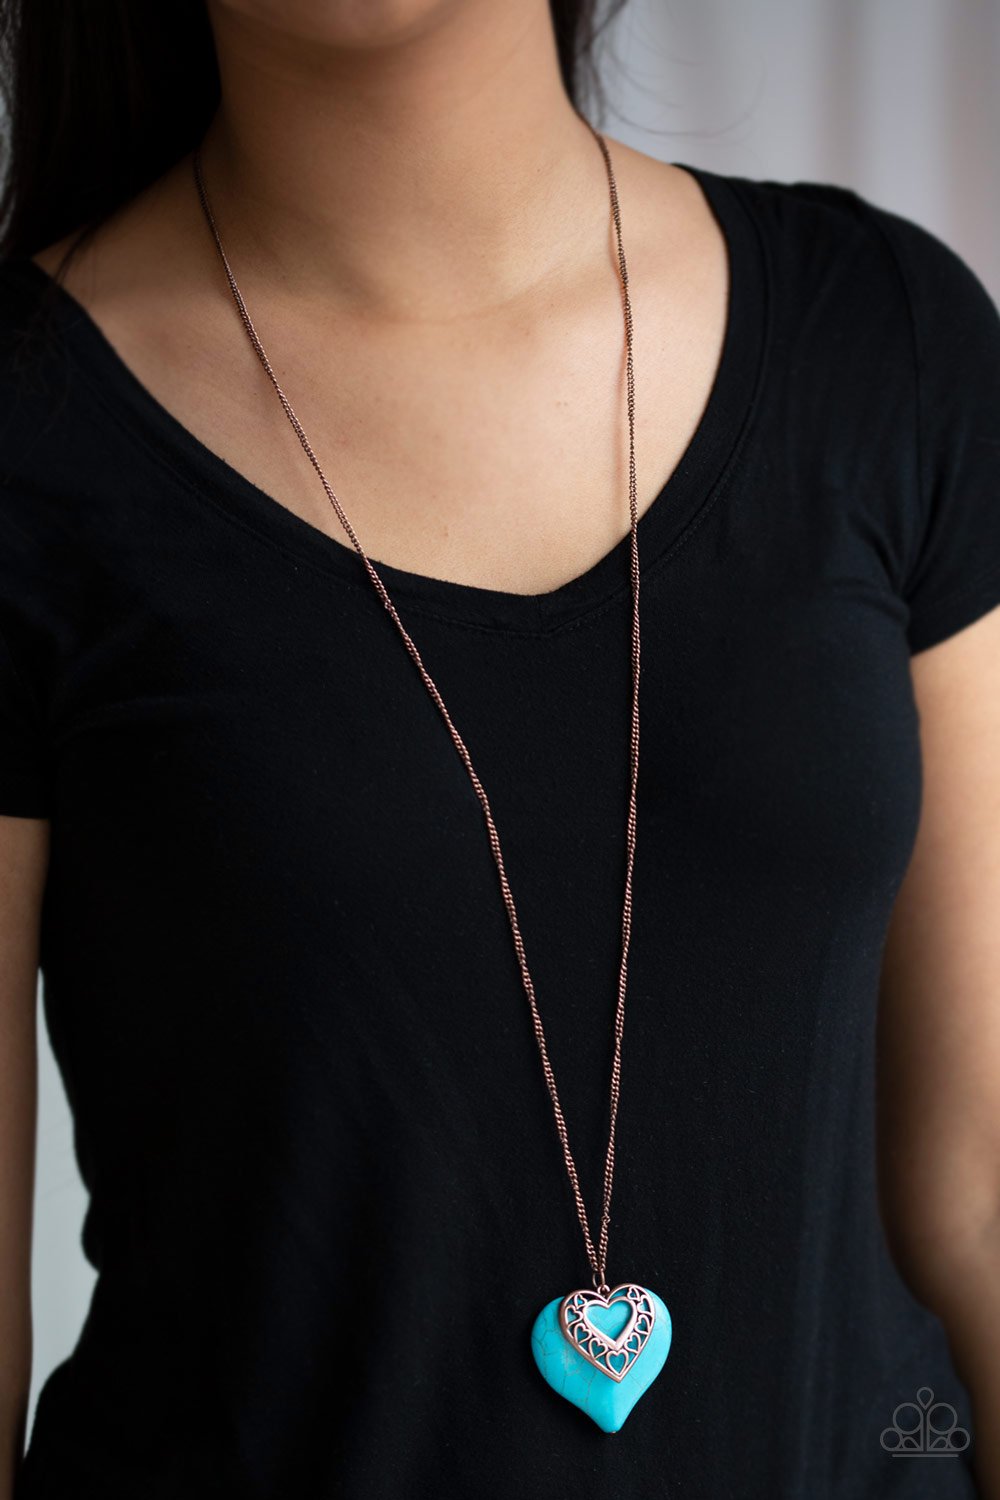 Southern Heart-copper-Paparazzi necklace